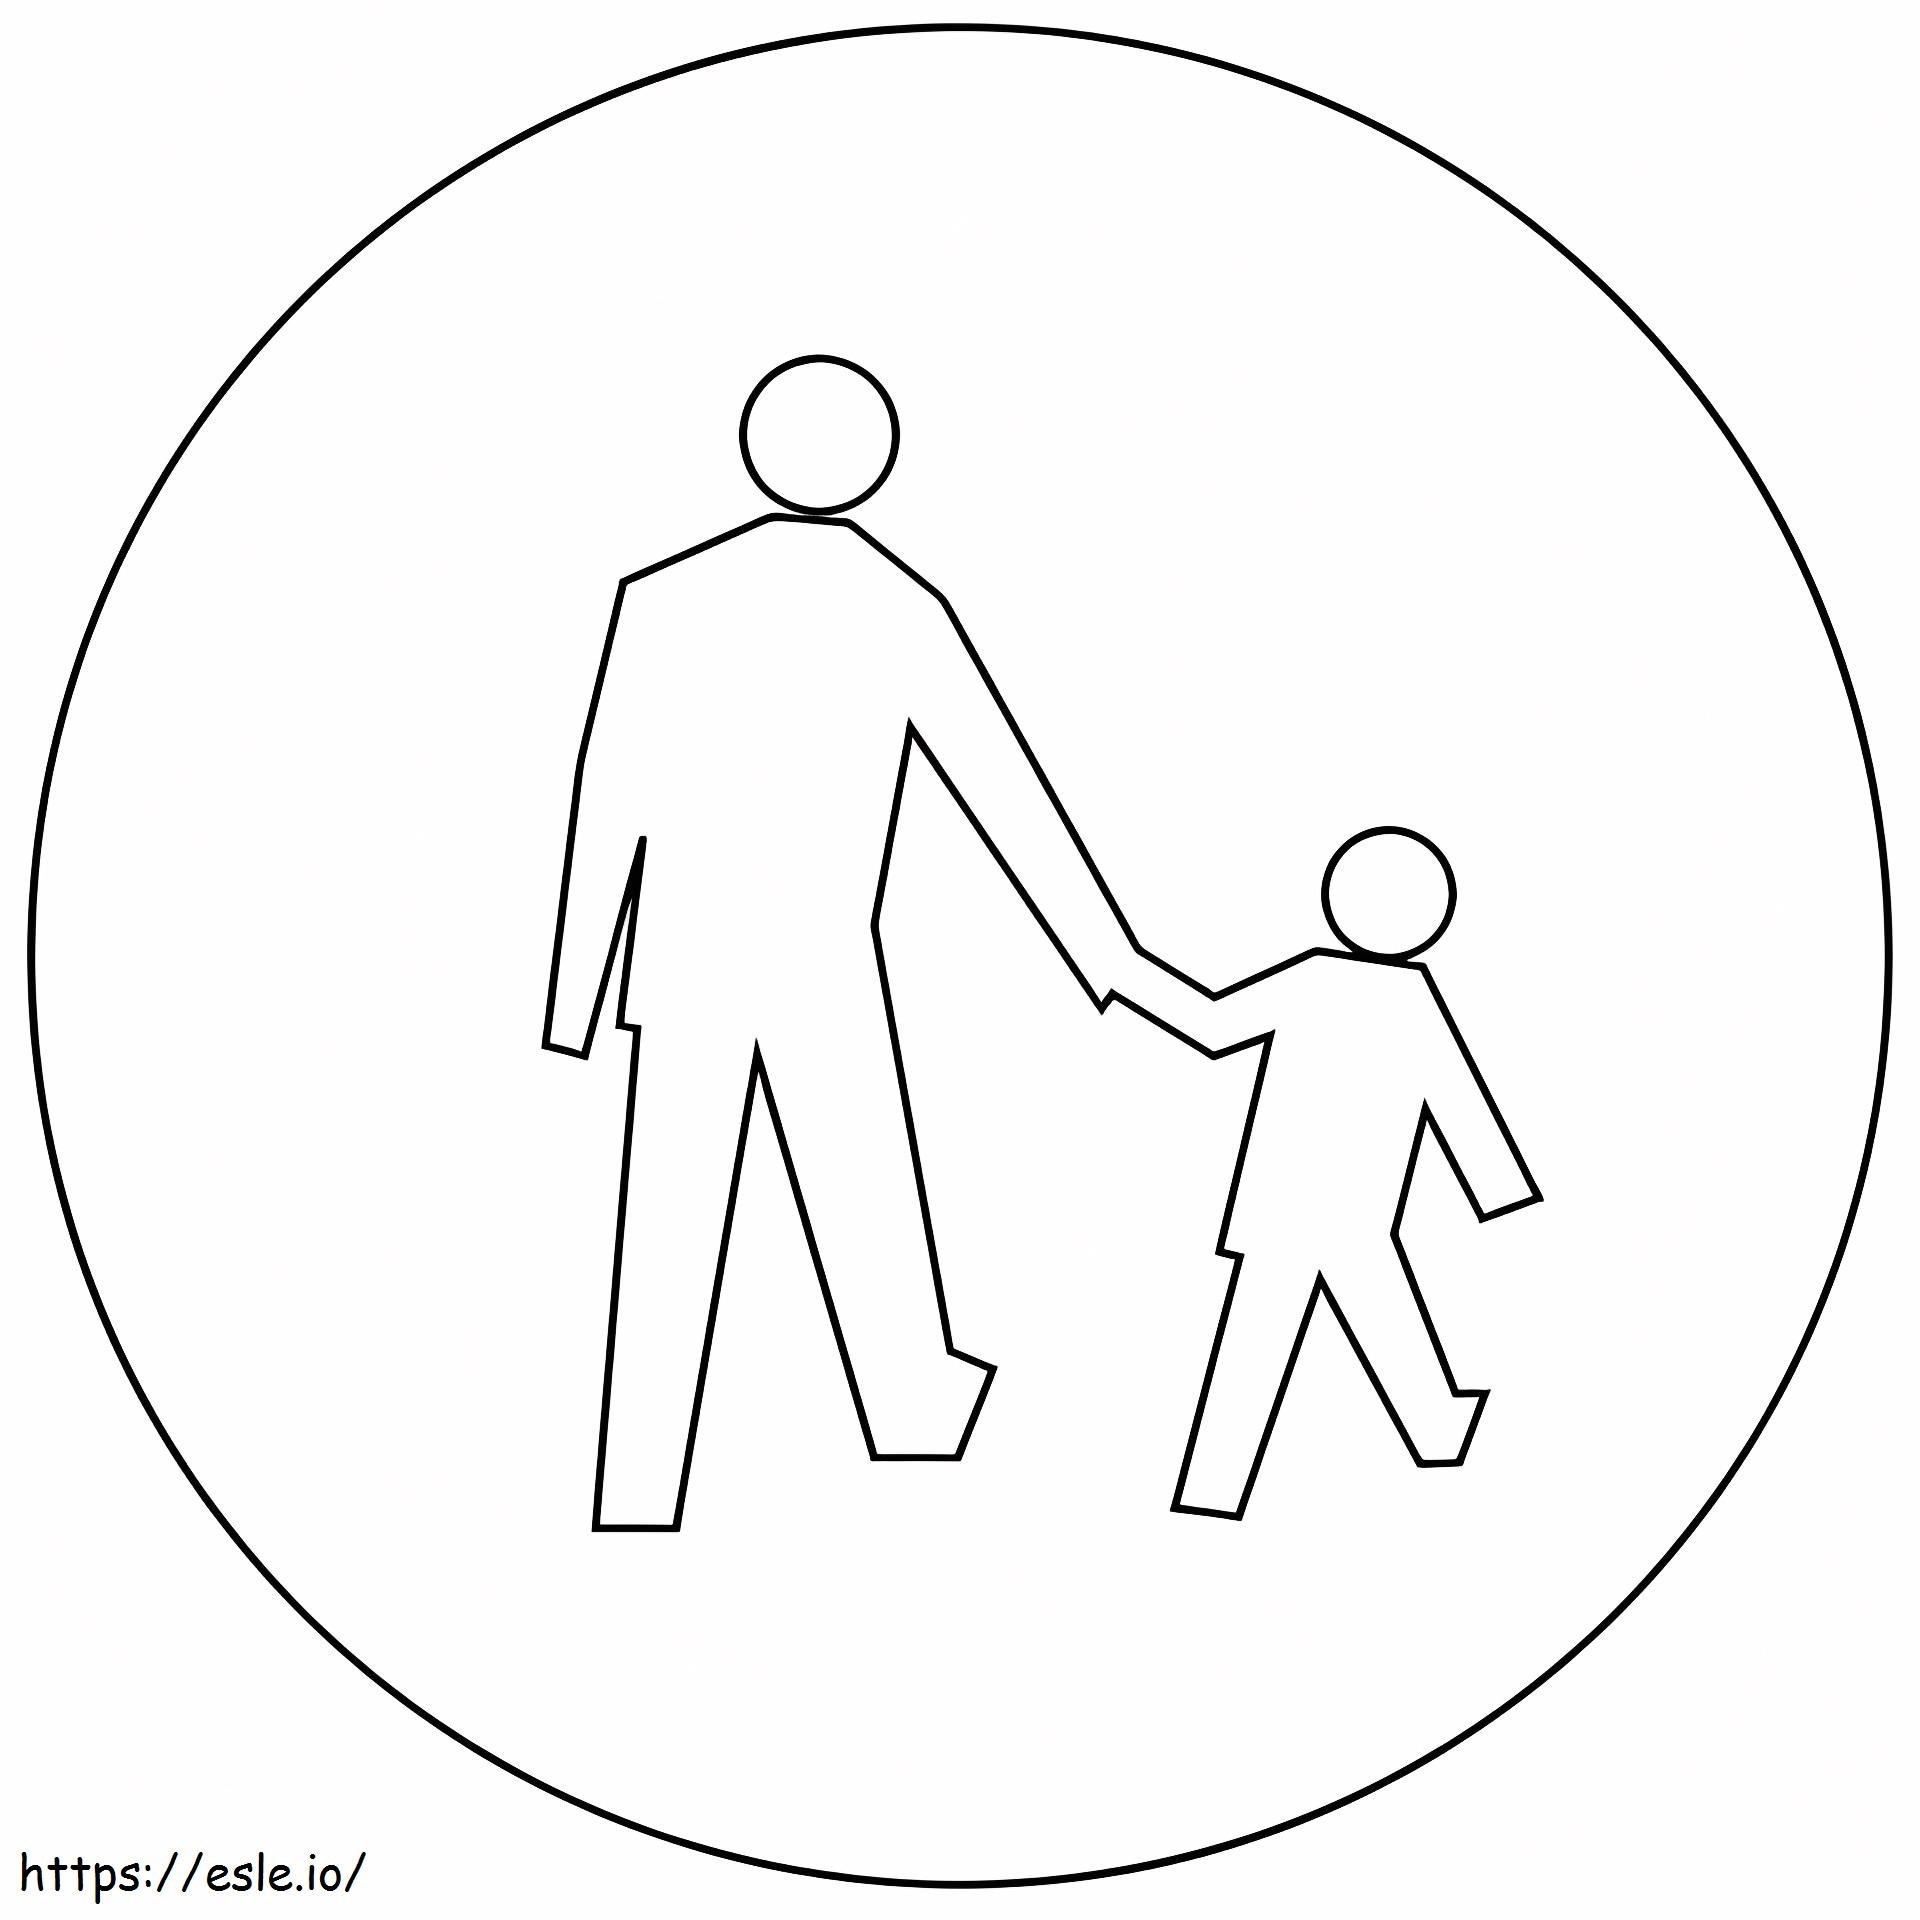 Pedestrians Only coloring page